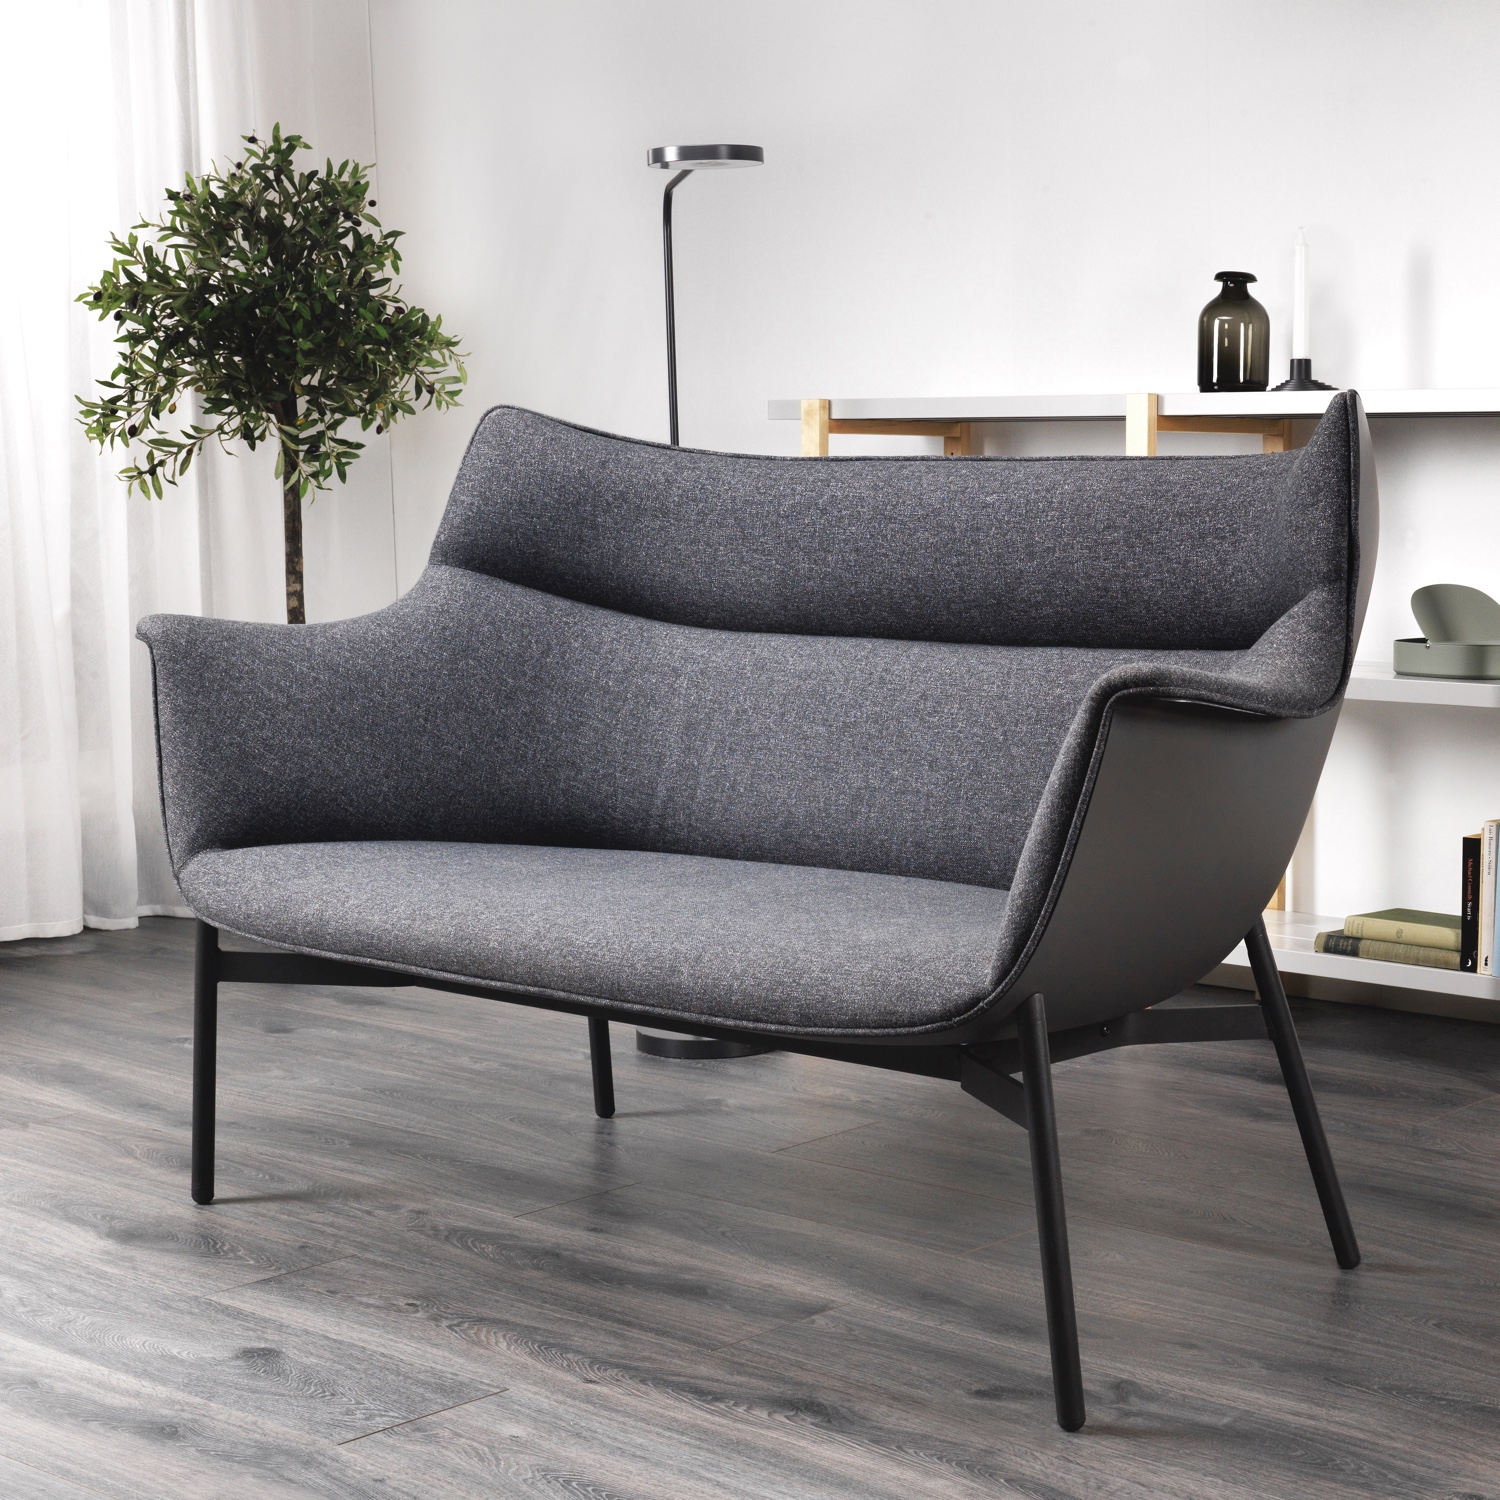 YPPERLIG two-seater sofa front